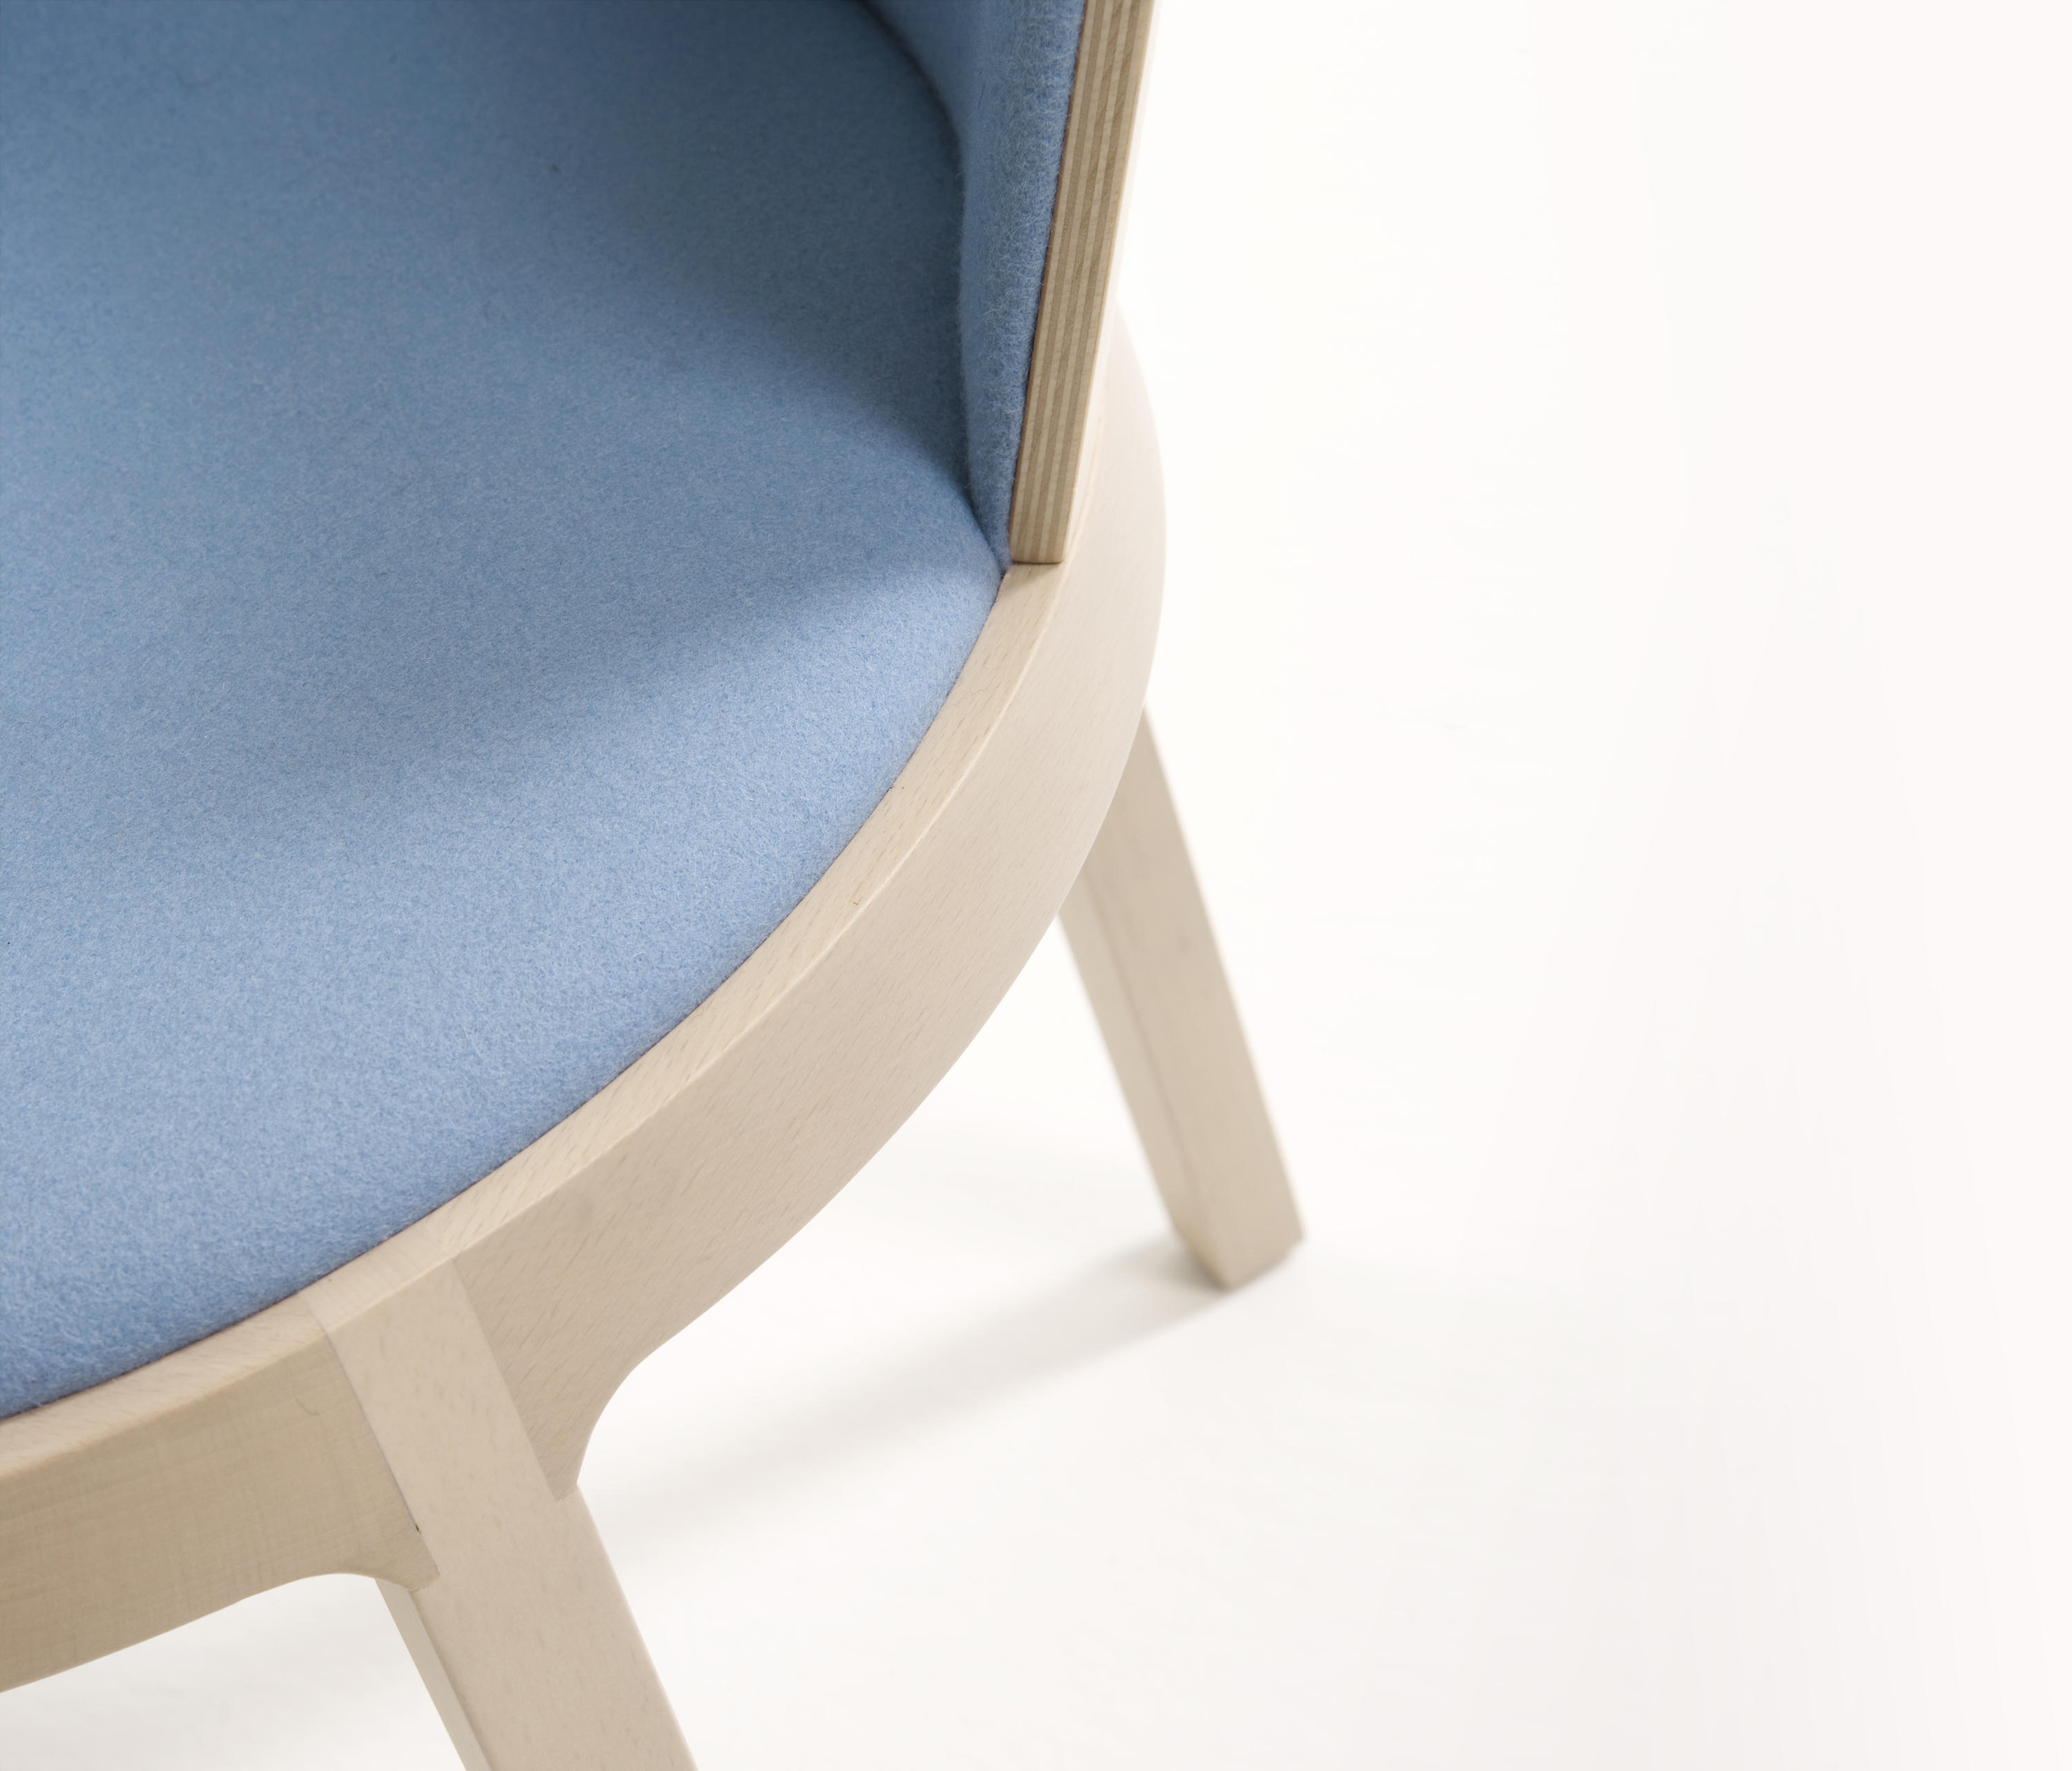 Aro 691 M Chairs From Capdell Architonic